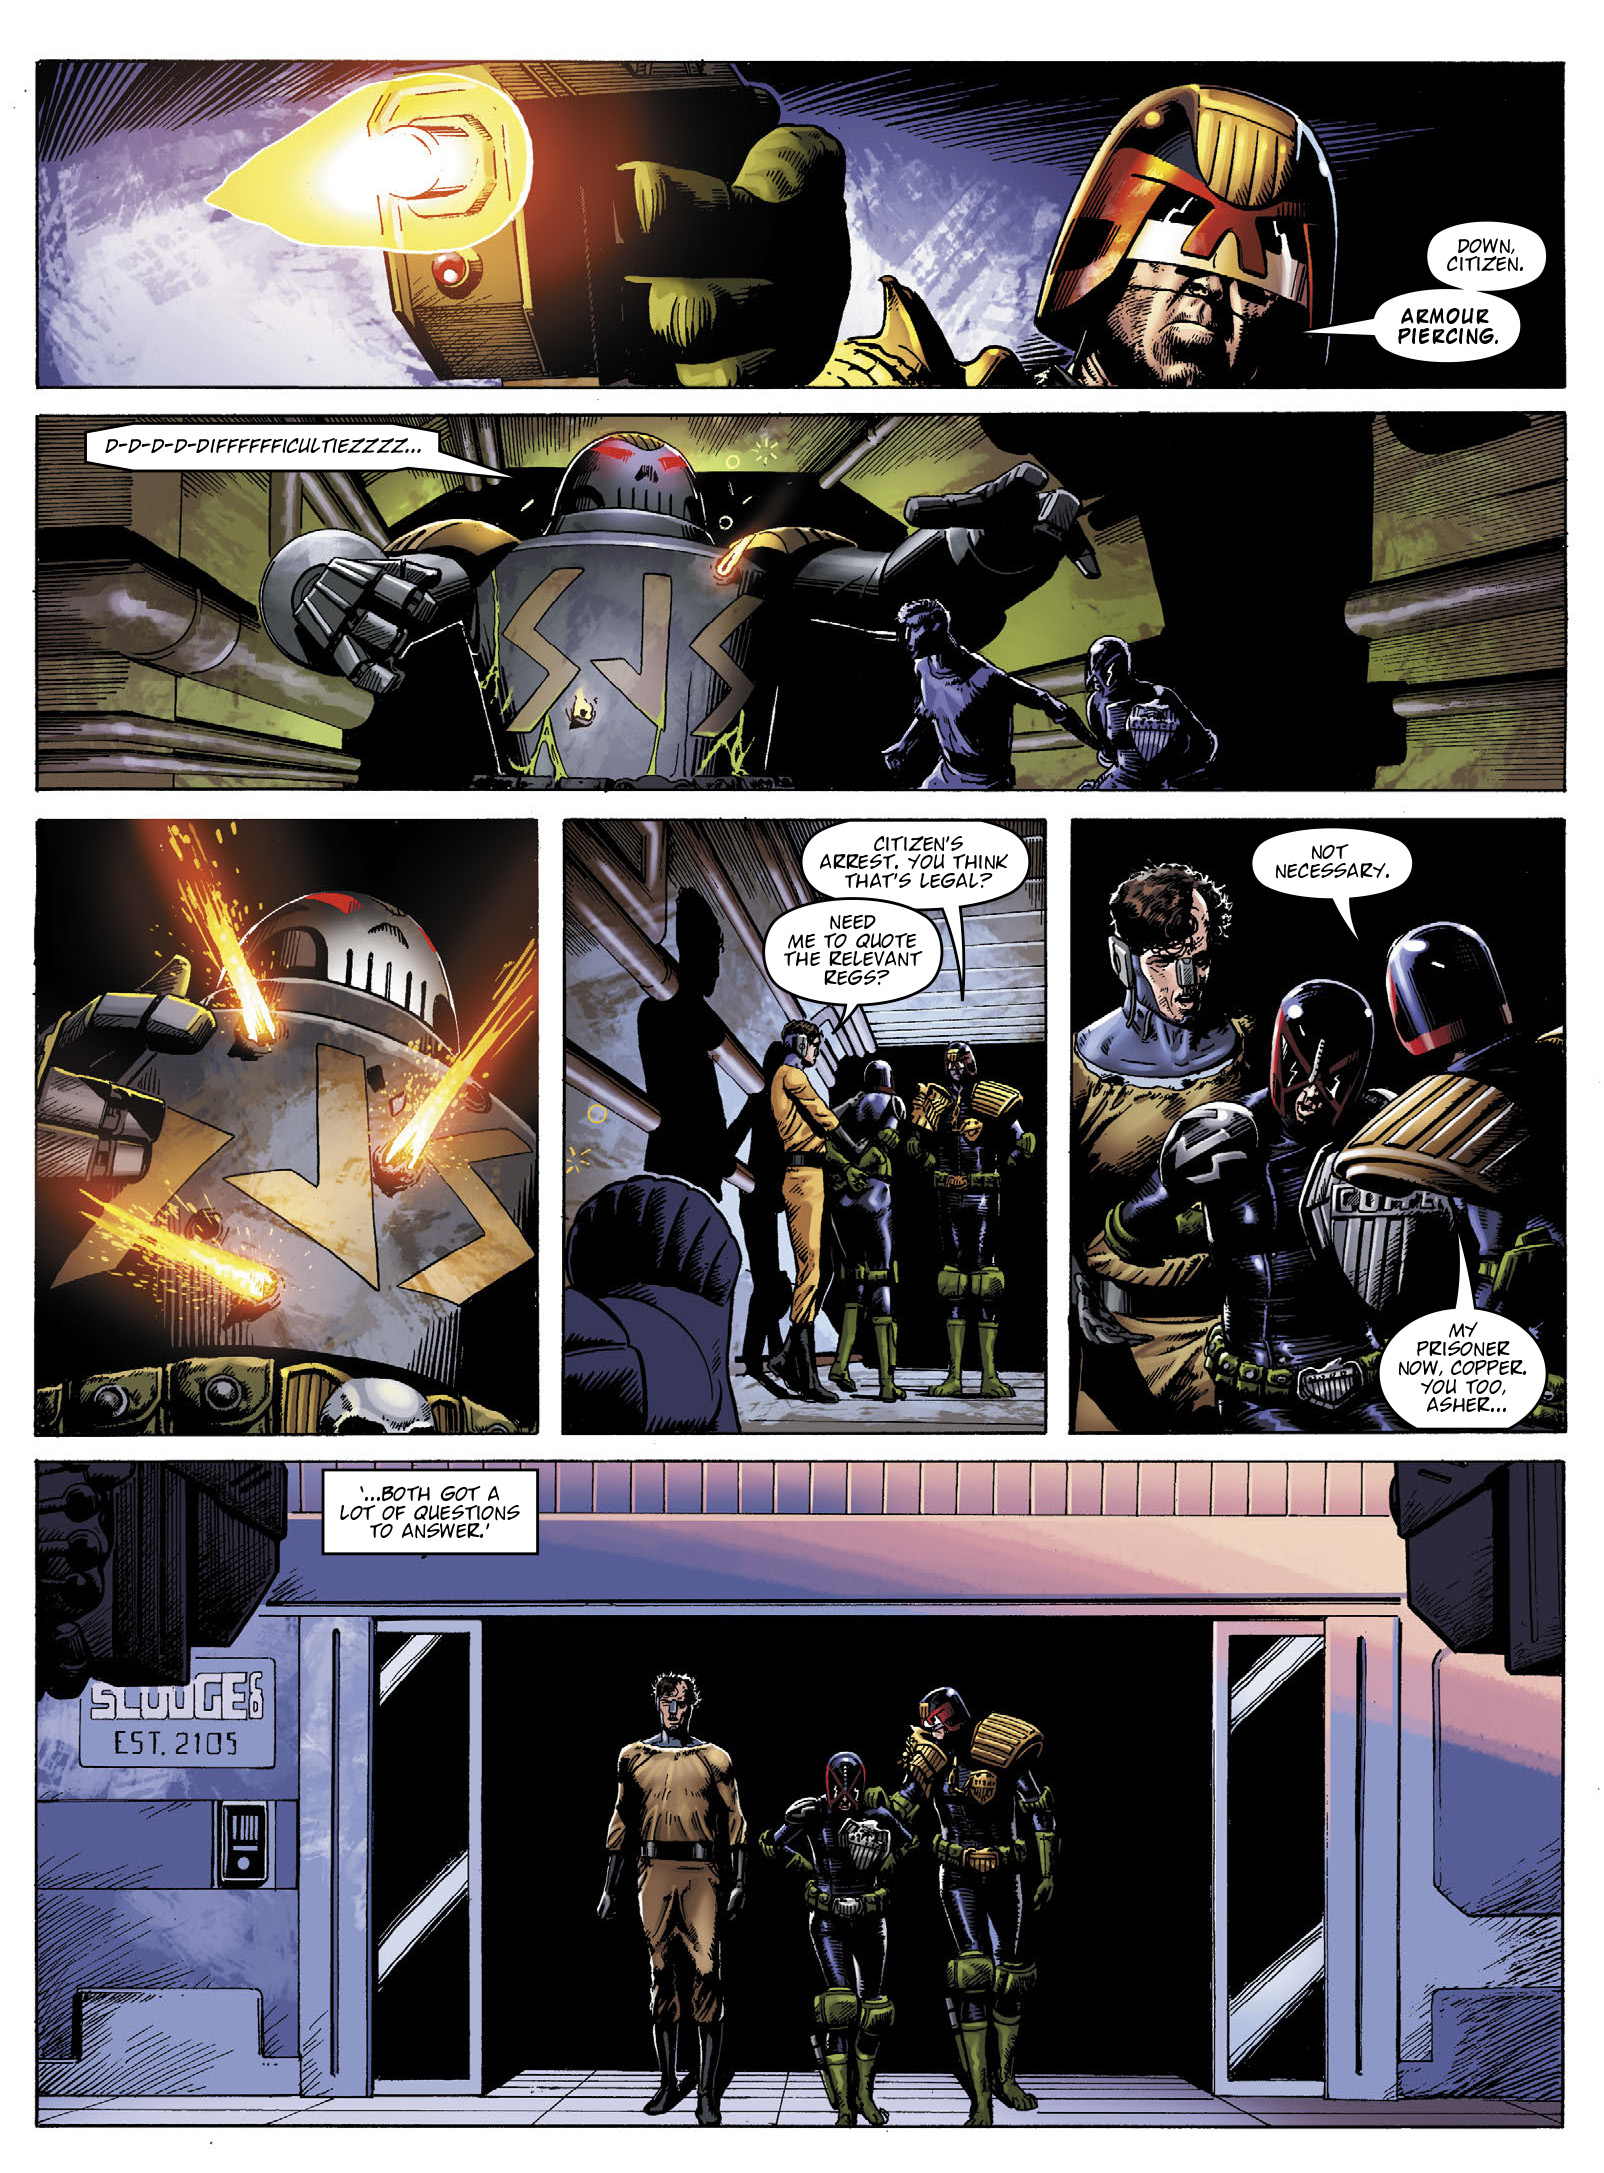 2000 AD: Chapter 2230 - Page 4